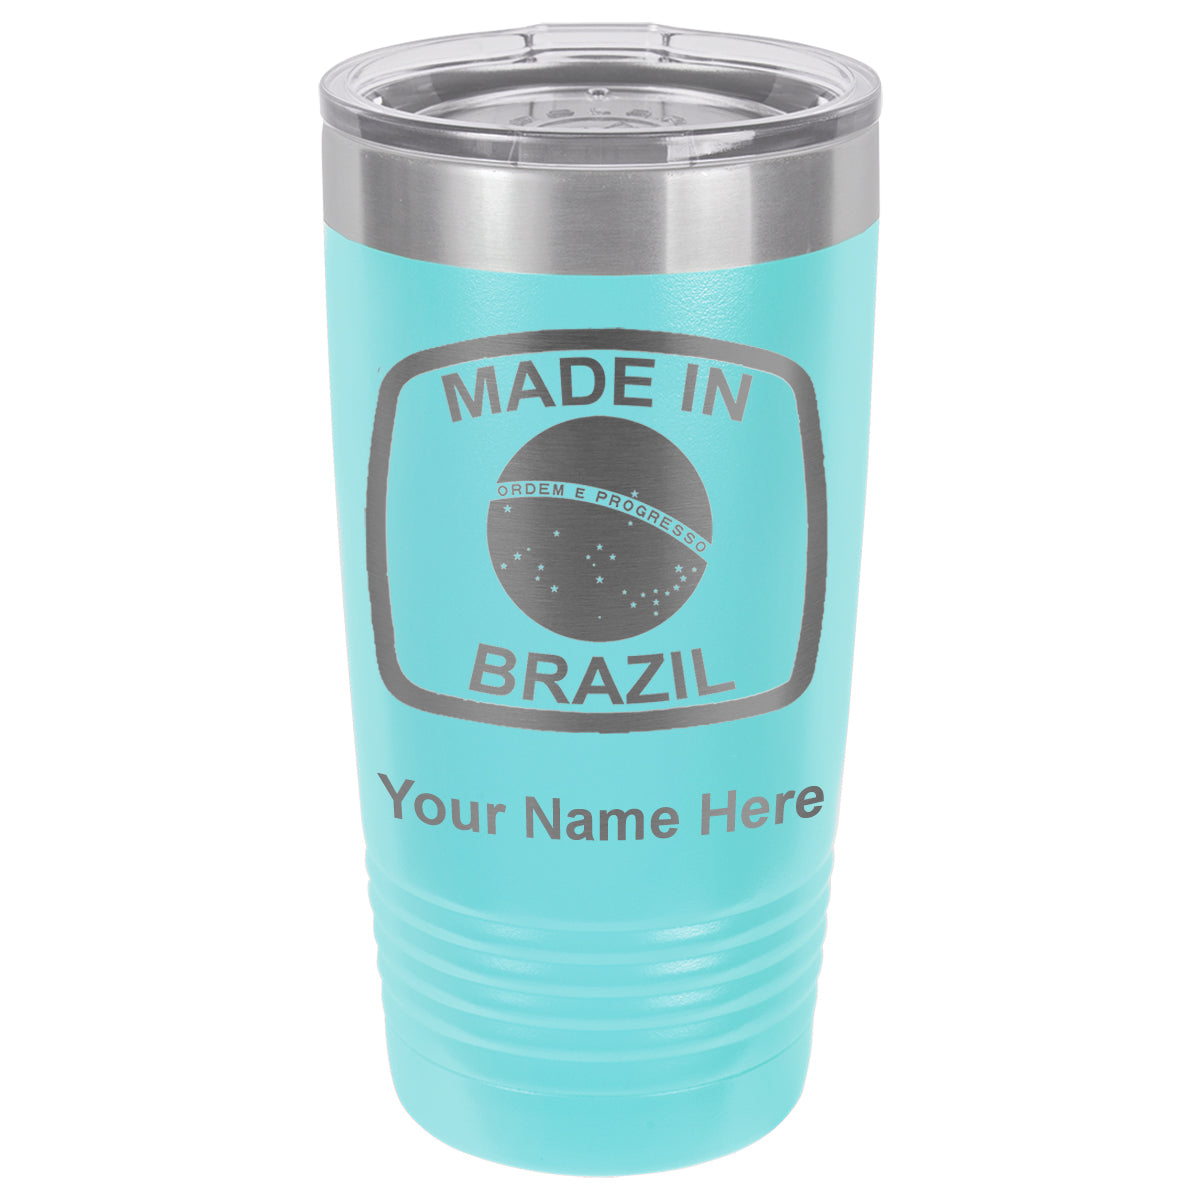 20oz Vacuum Insulated Tumbler Mug, Made in Brazil, Personalized Engraving Included